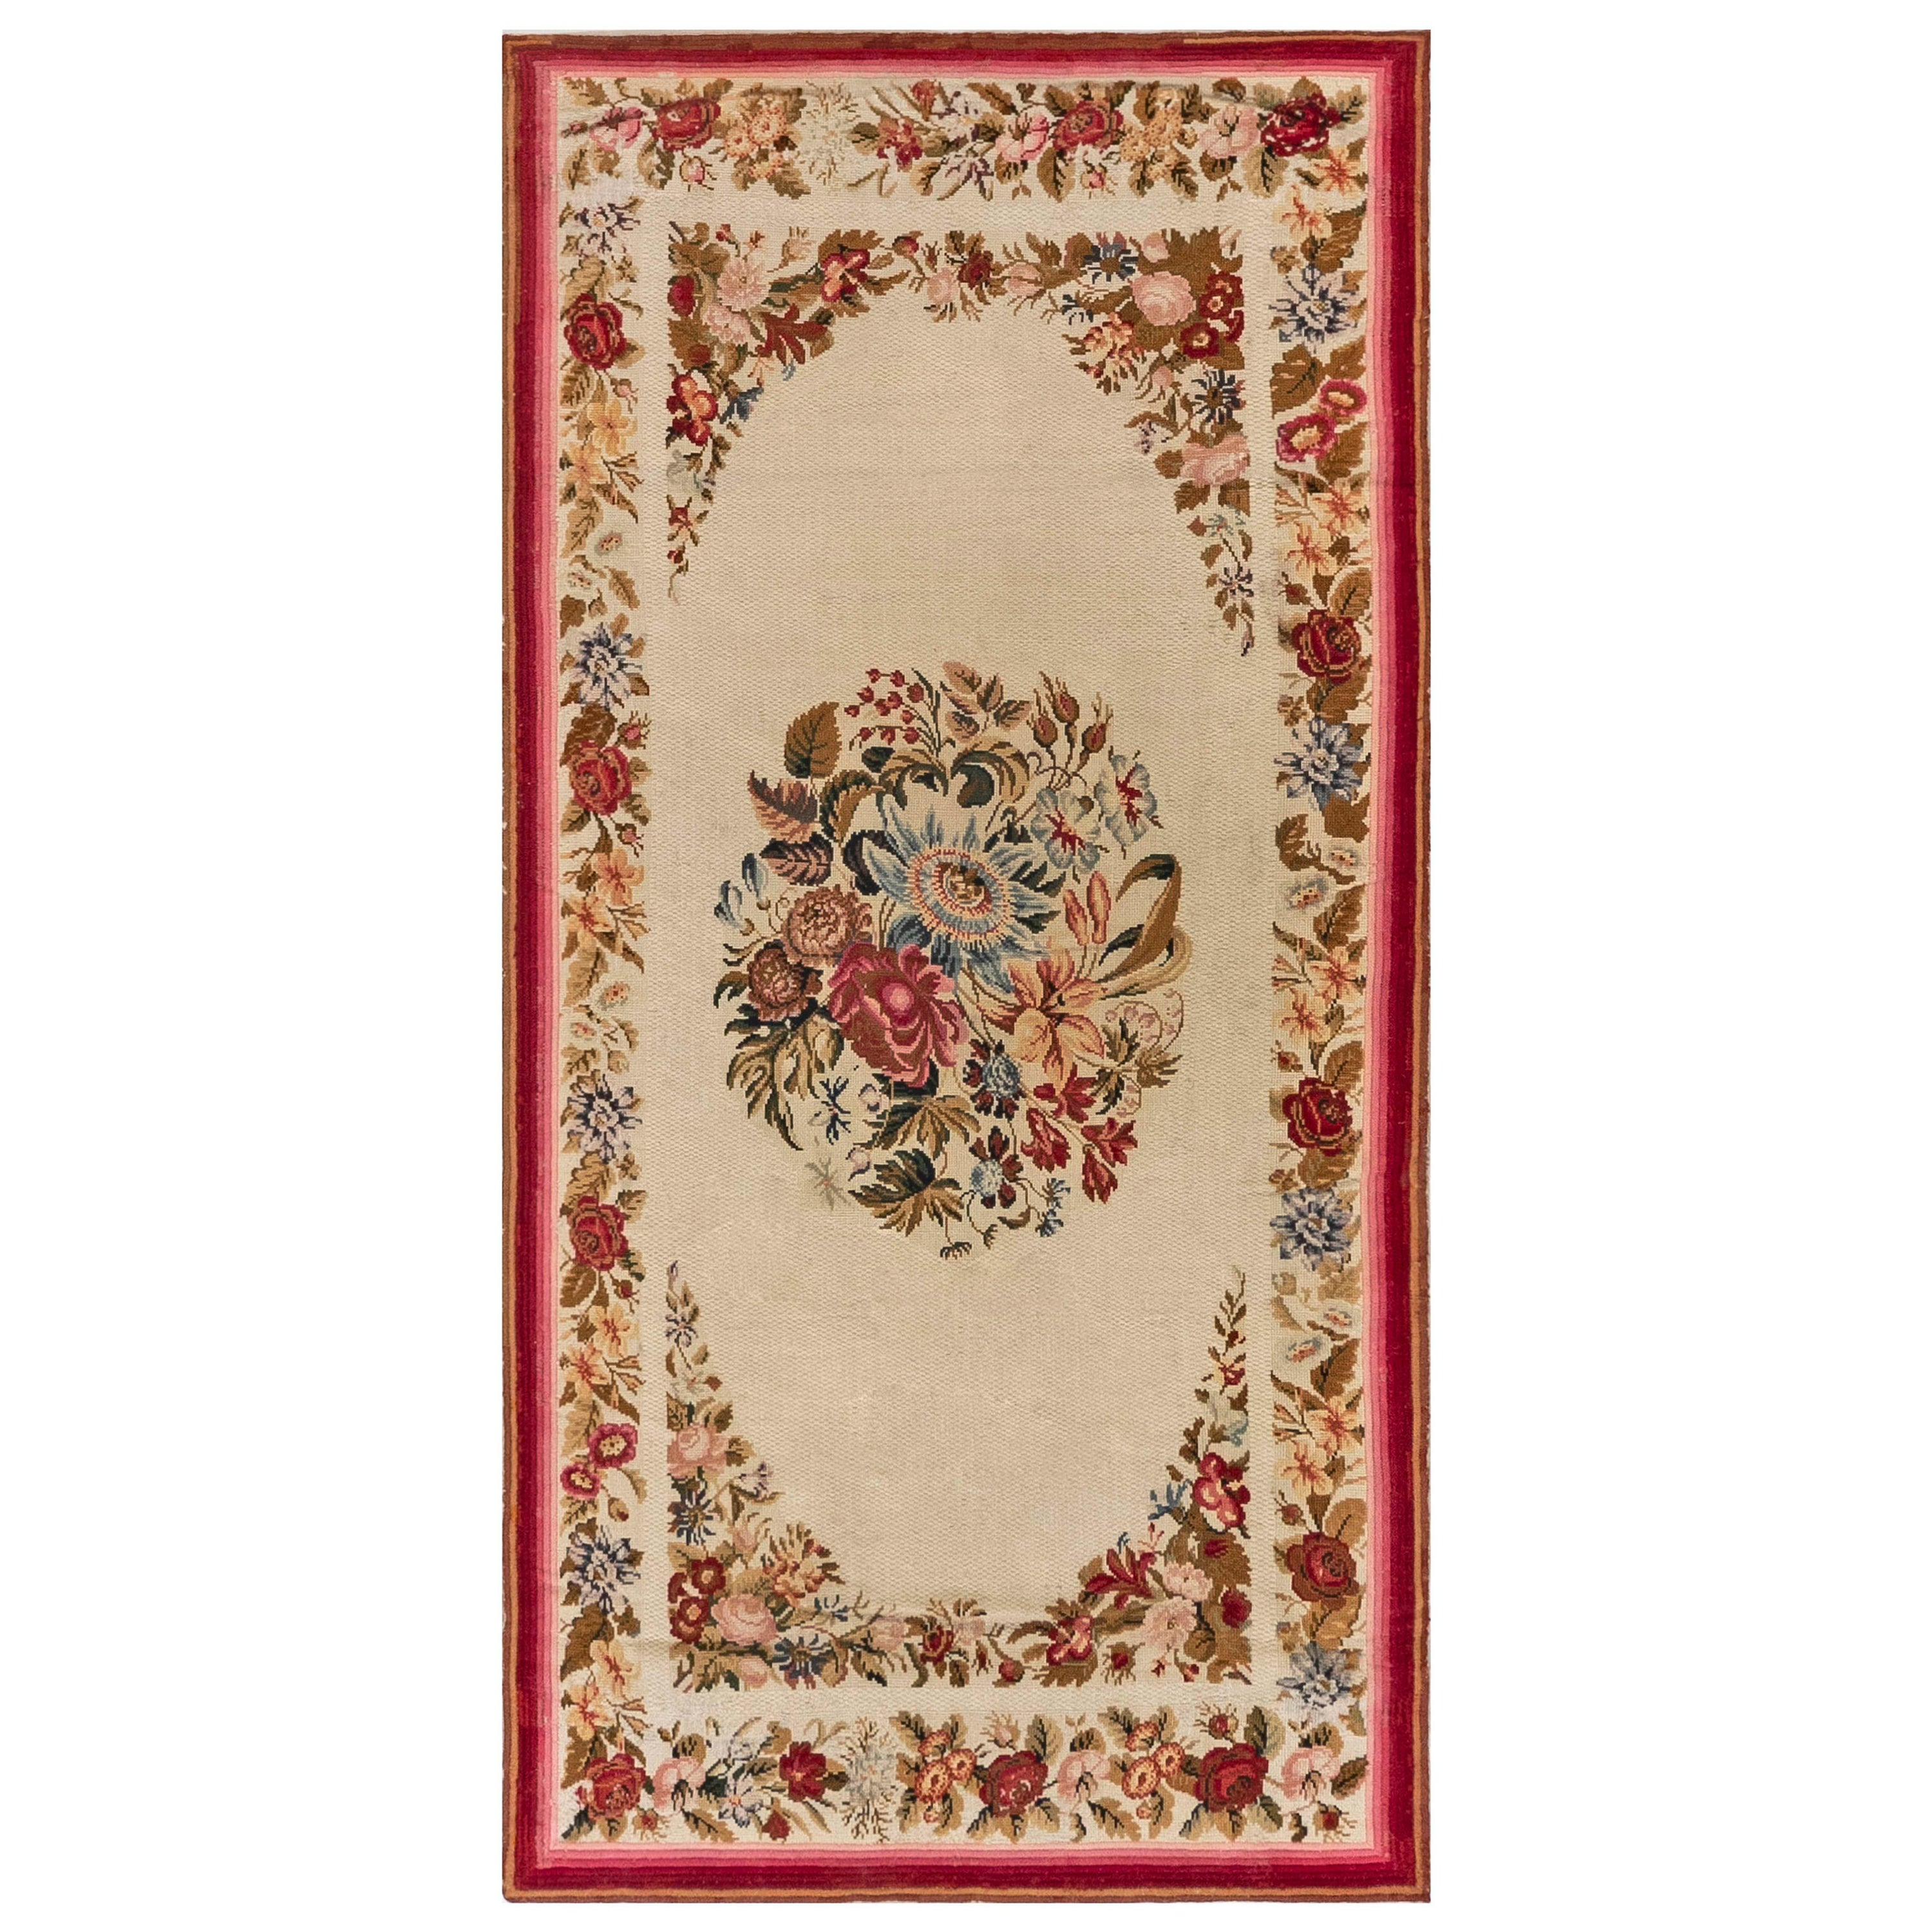 Early 20th Century English Floral Needlework Rug